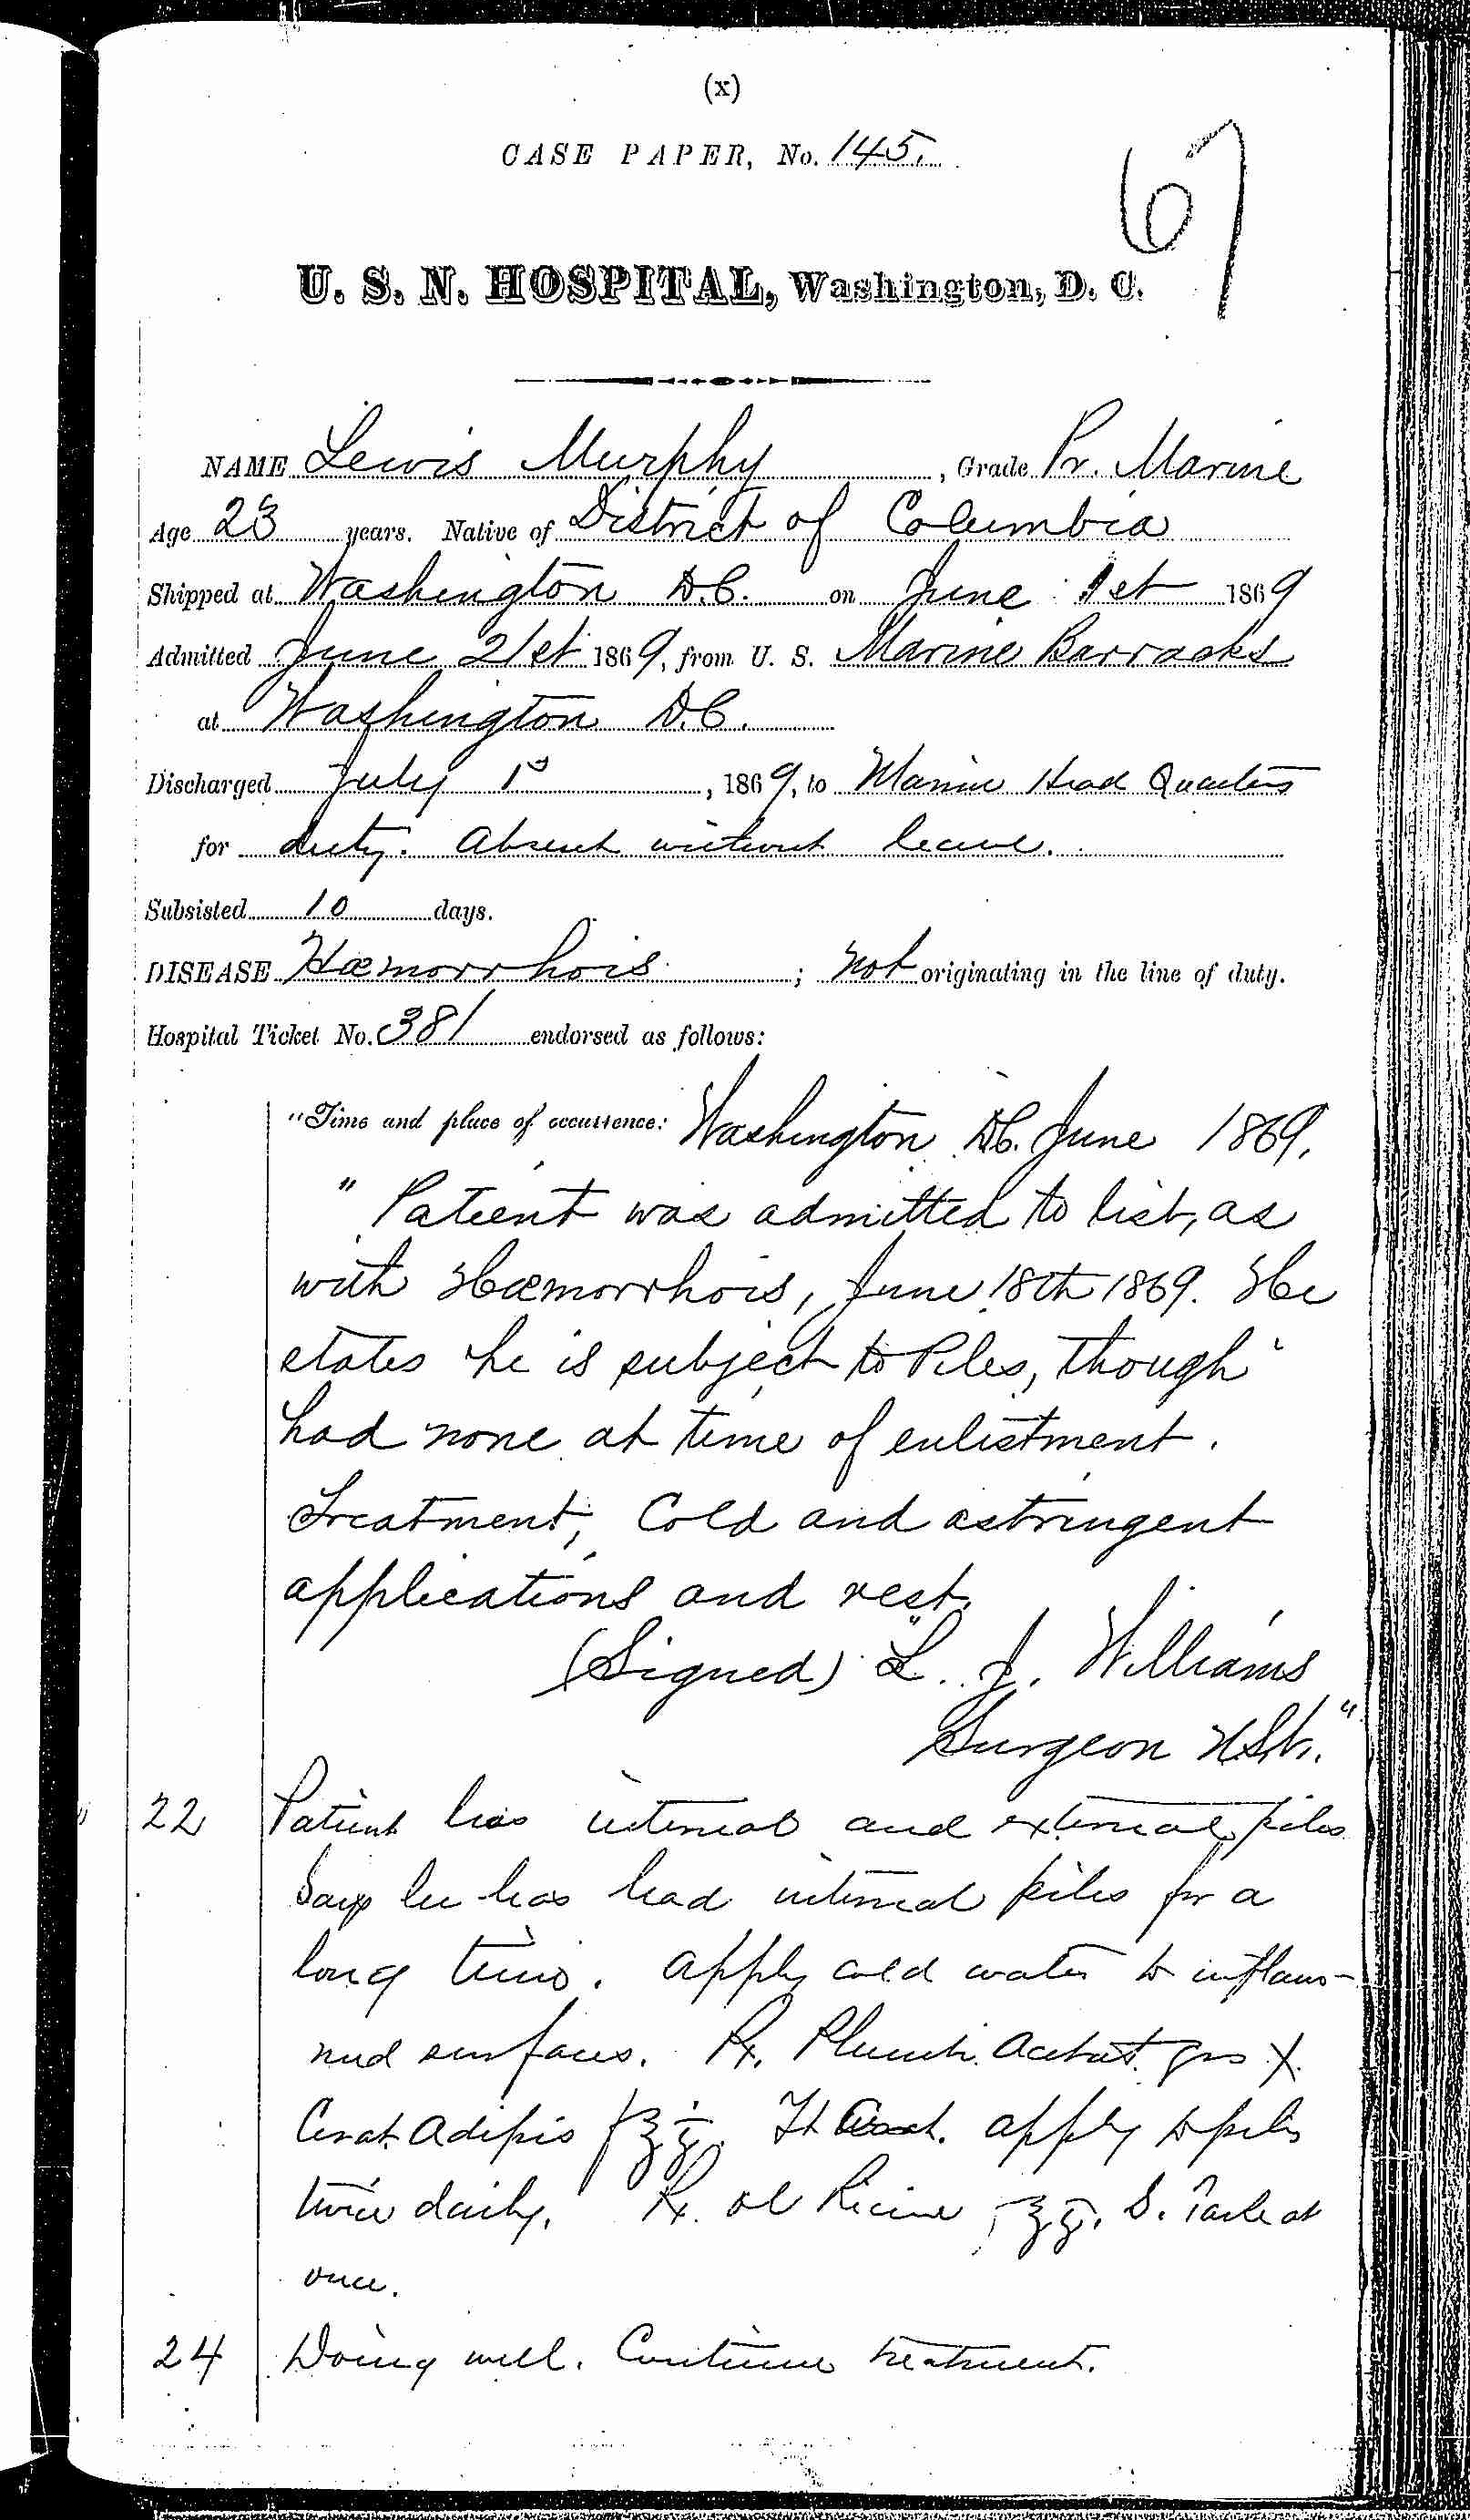 Entry for Lewis Murphy (page 1 of 2) in the log Hospital Tickets and Case Papers - Naval Hospital - Washington, D.C. - 1868-69